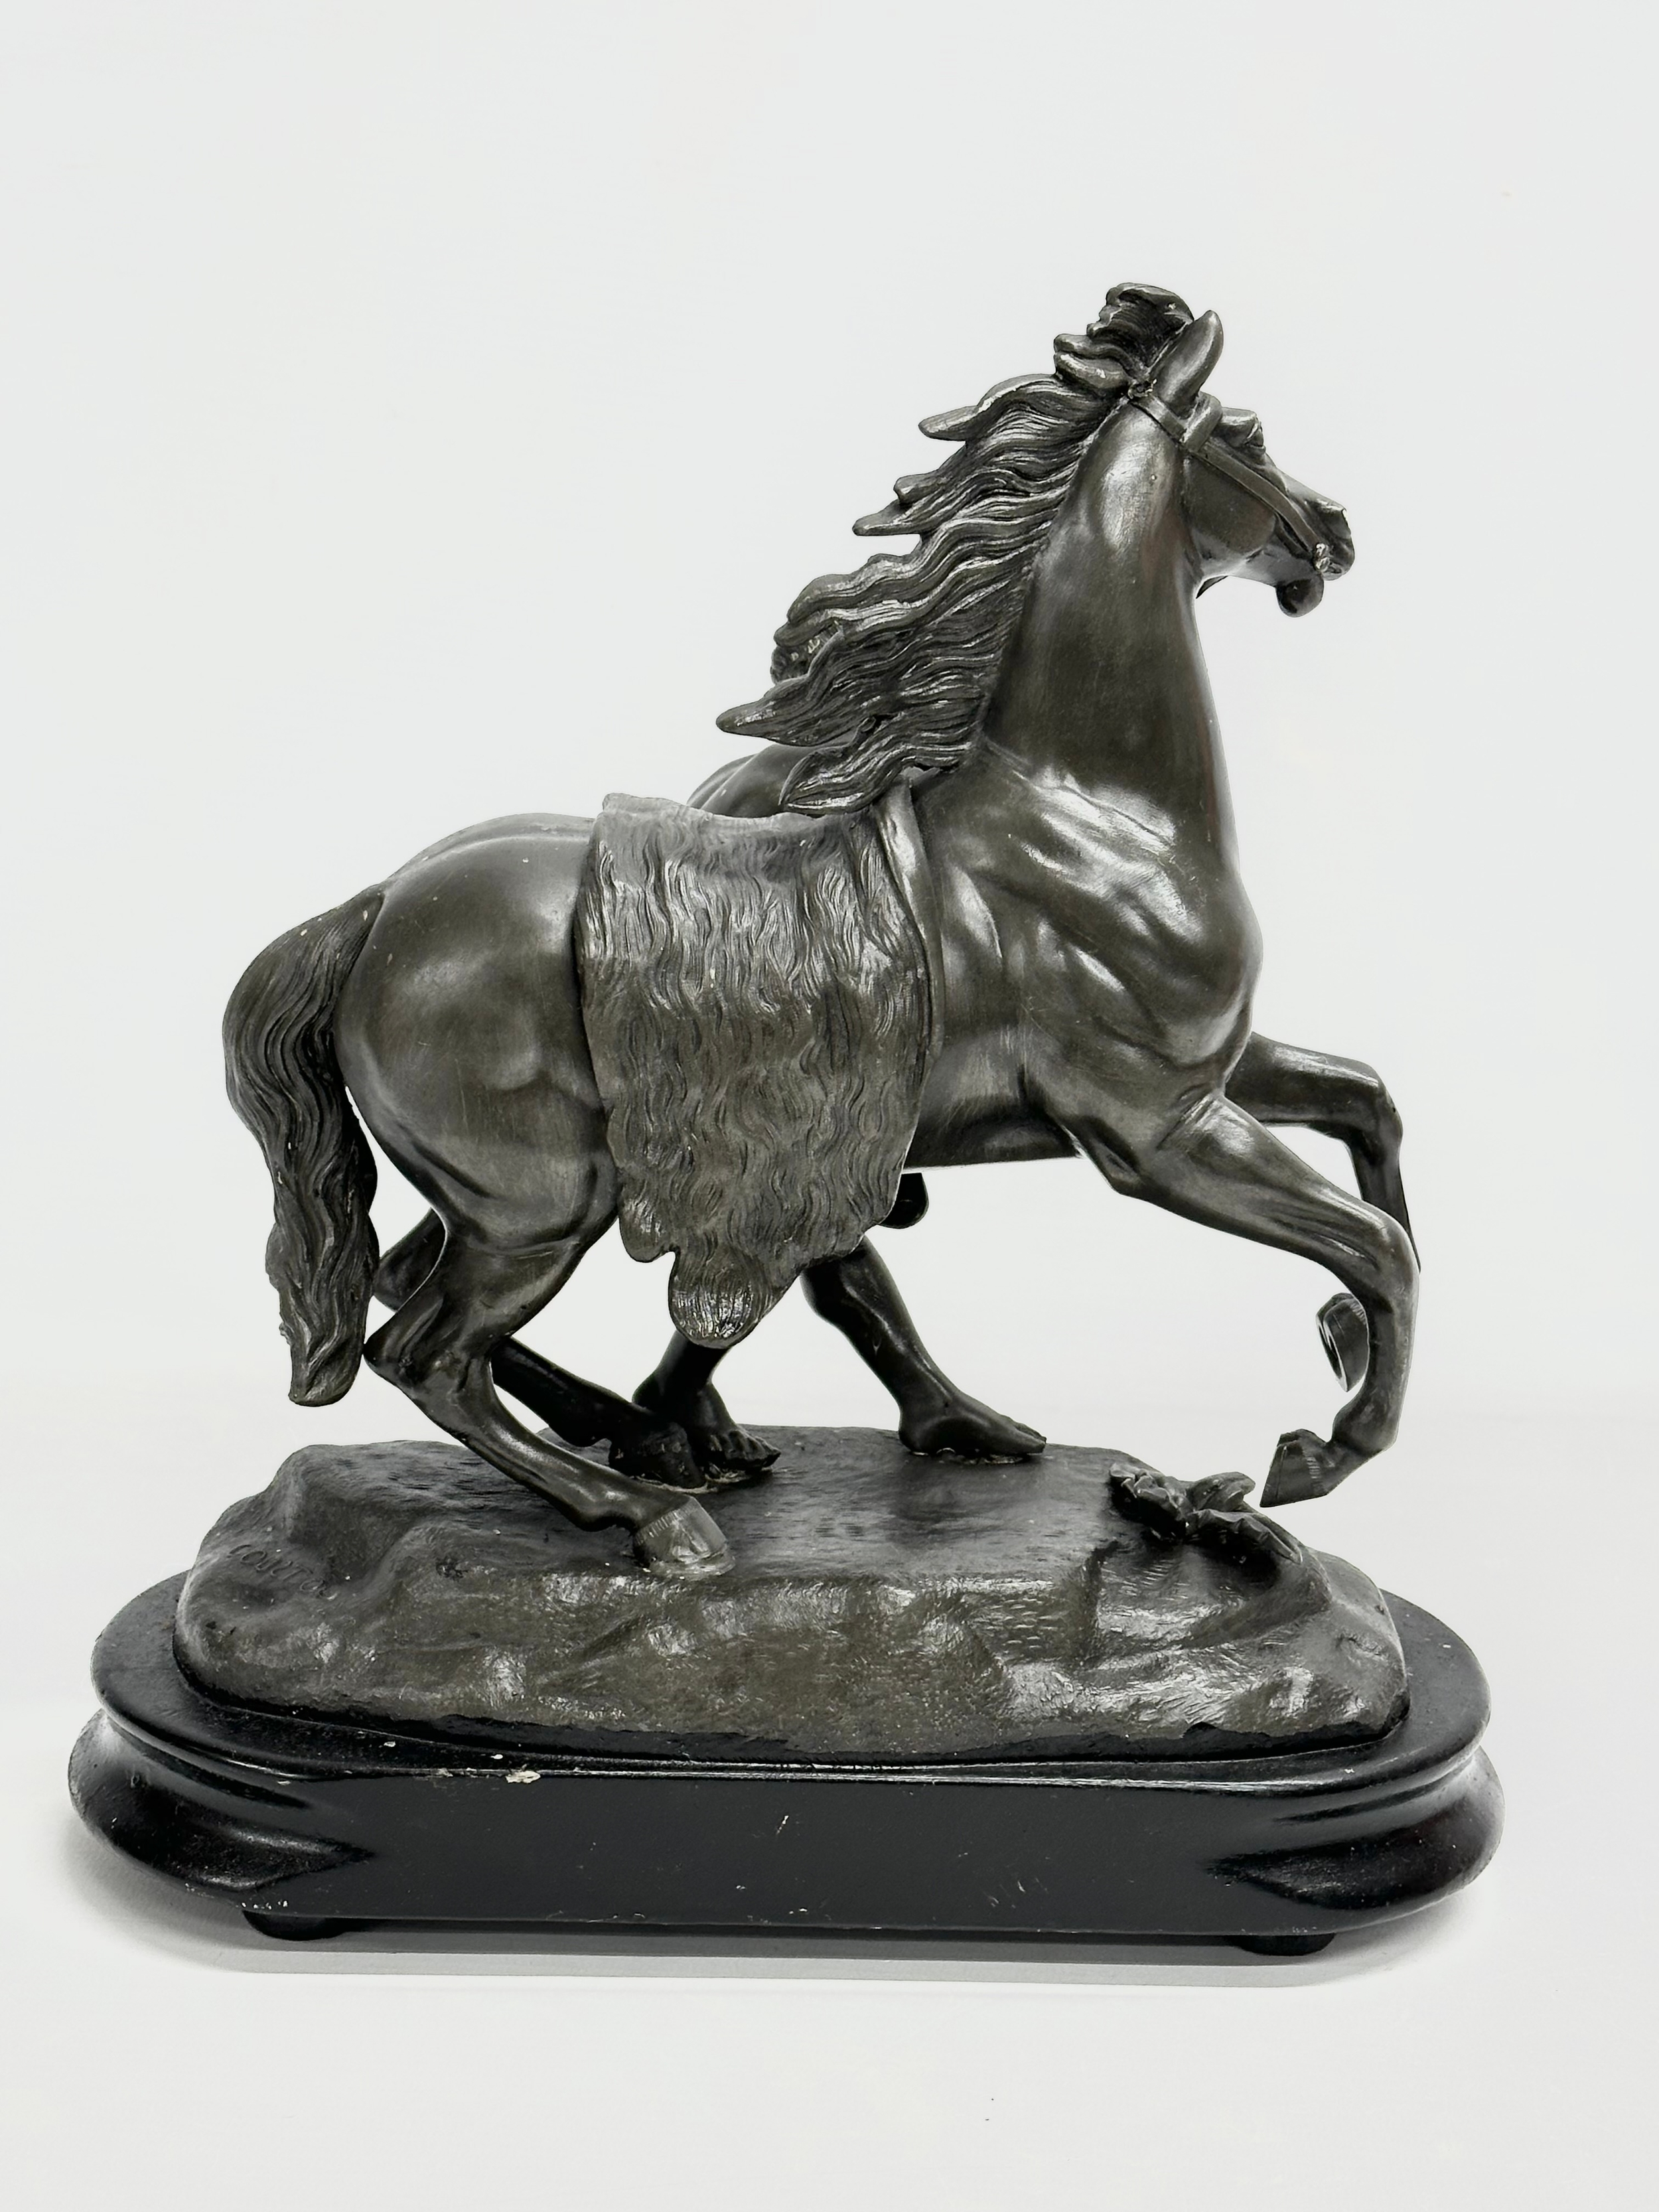 A Late 19th Century Spelter Marley Horse figure. Circa 1880-1900. 27x14x31cm - Image 5 of 5